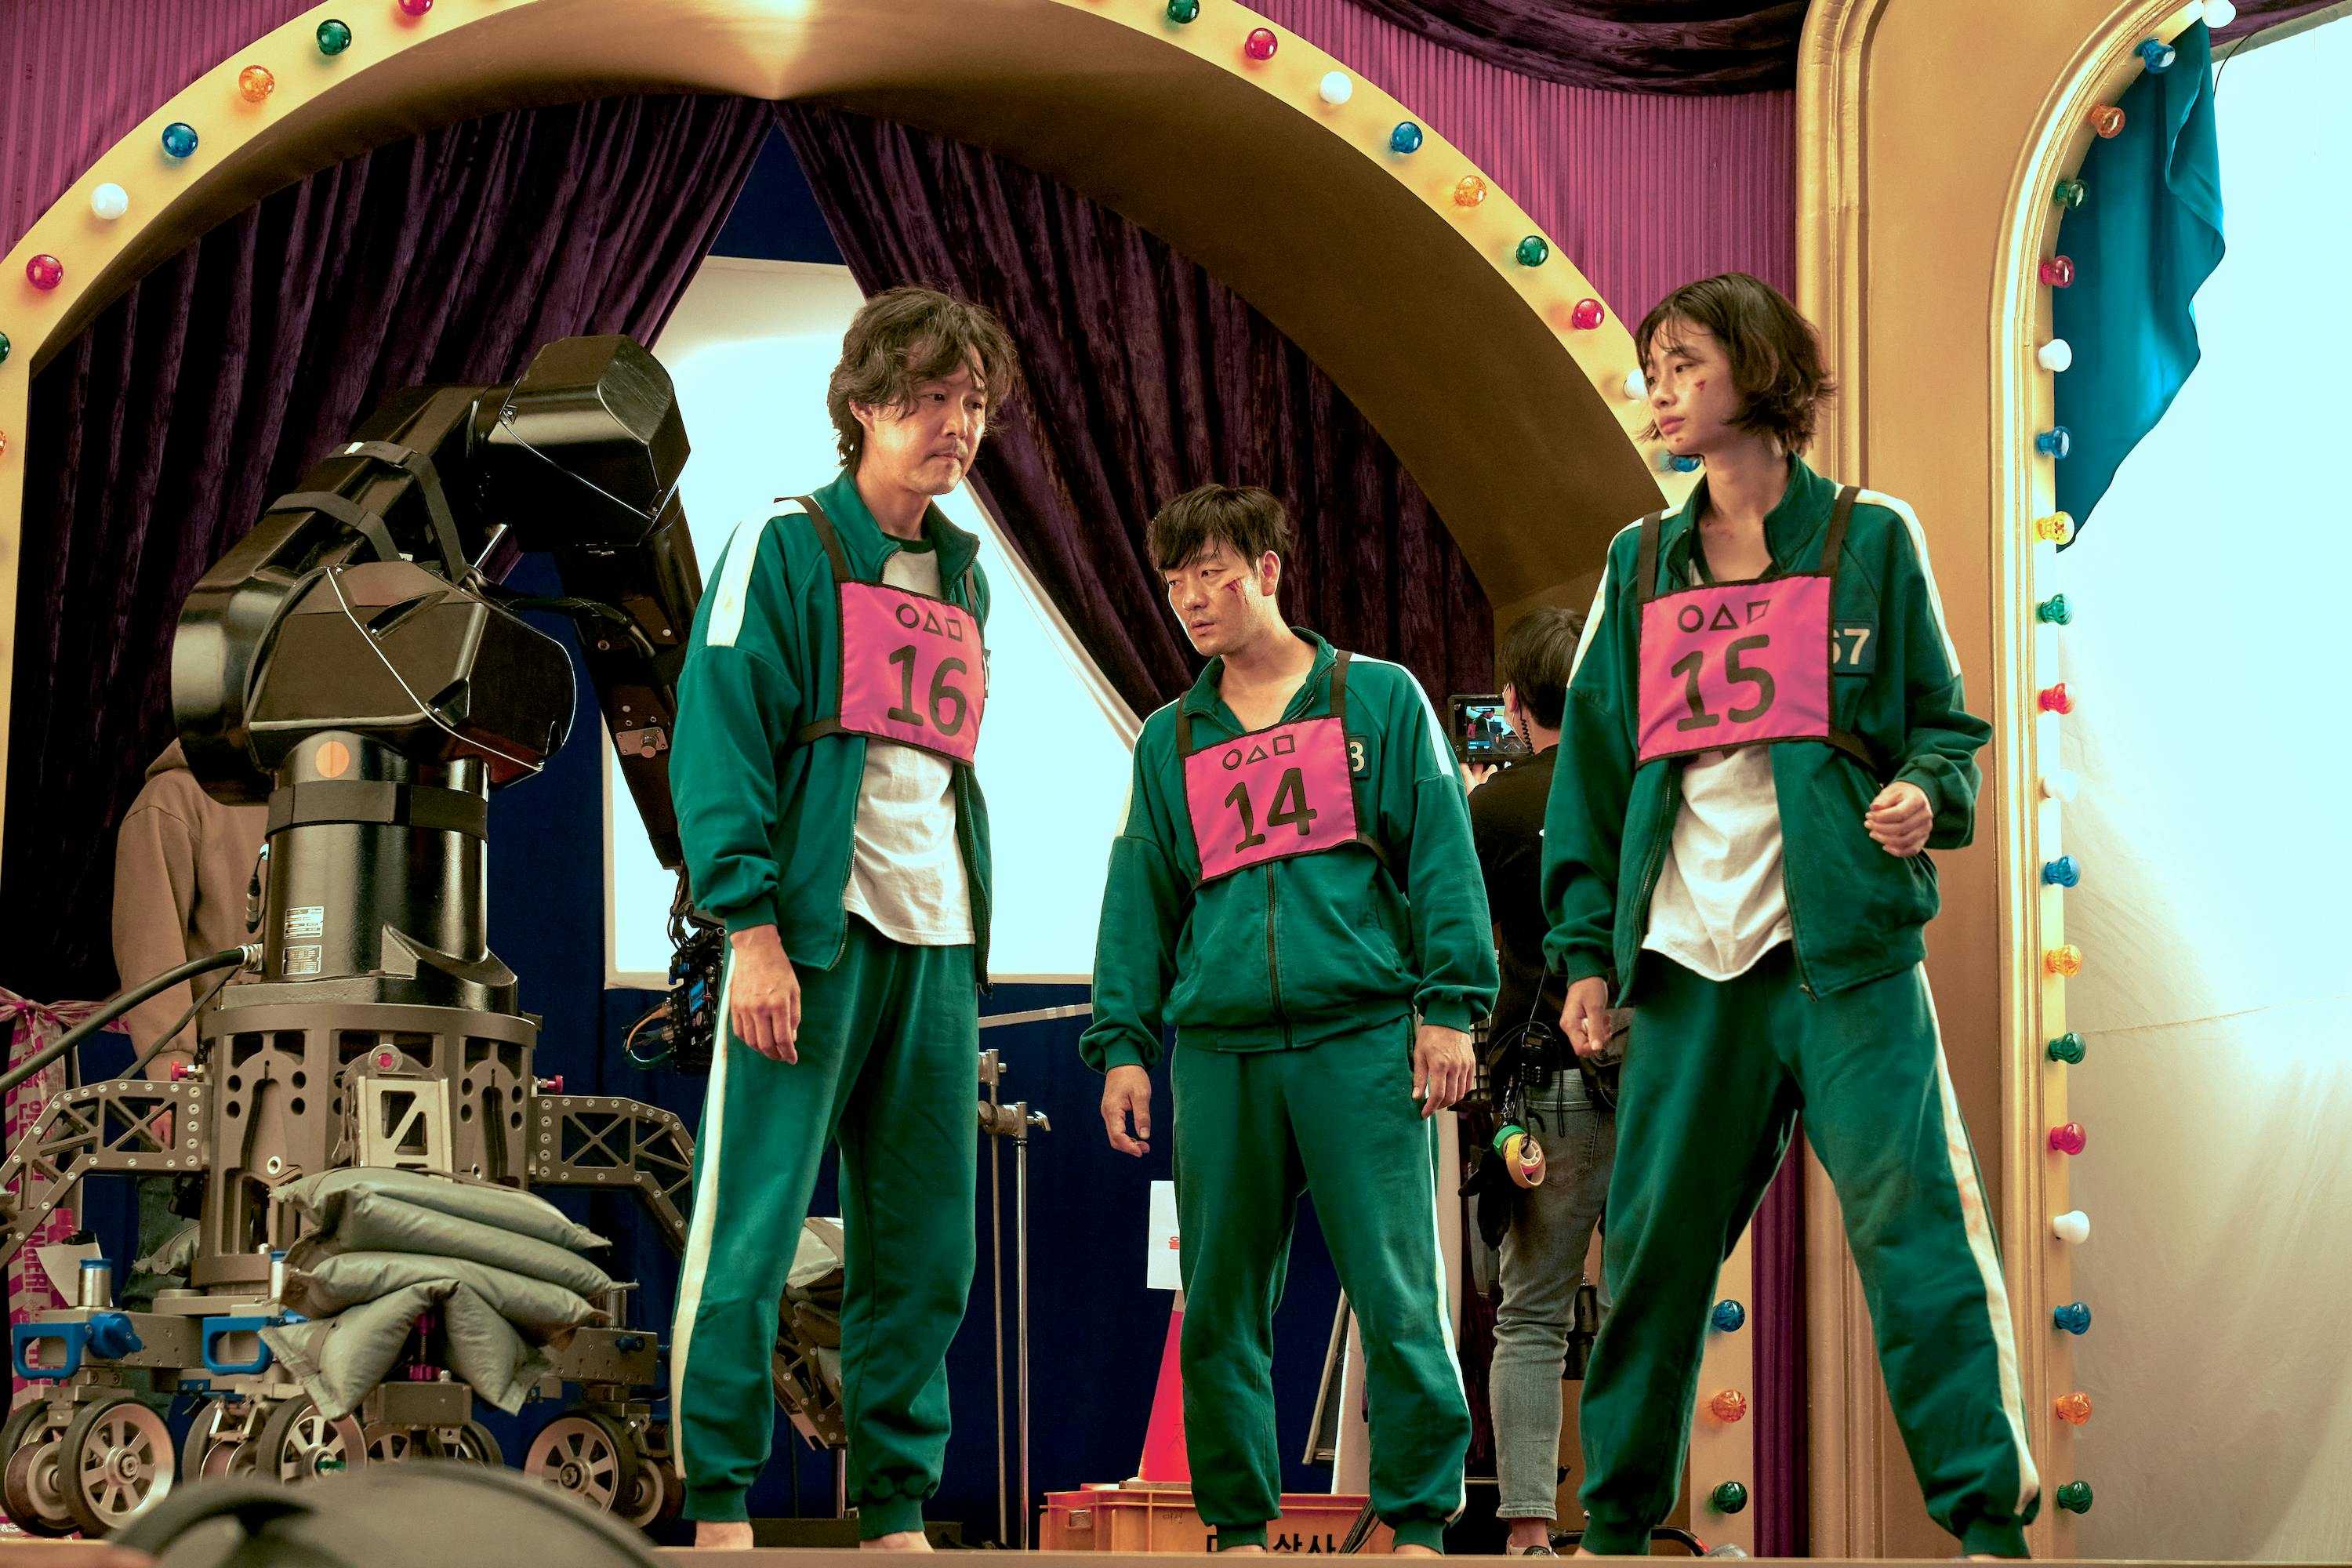 Lee Jung-jae, Park Hae-soo, and Jung Ho-yeon wear their green tracksuits with their numbers in pink on their chest. They are surrounded by colorful lights and camera gear.